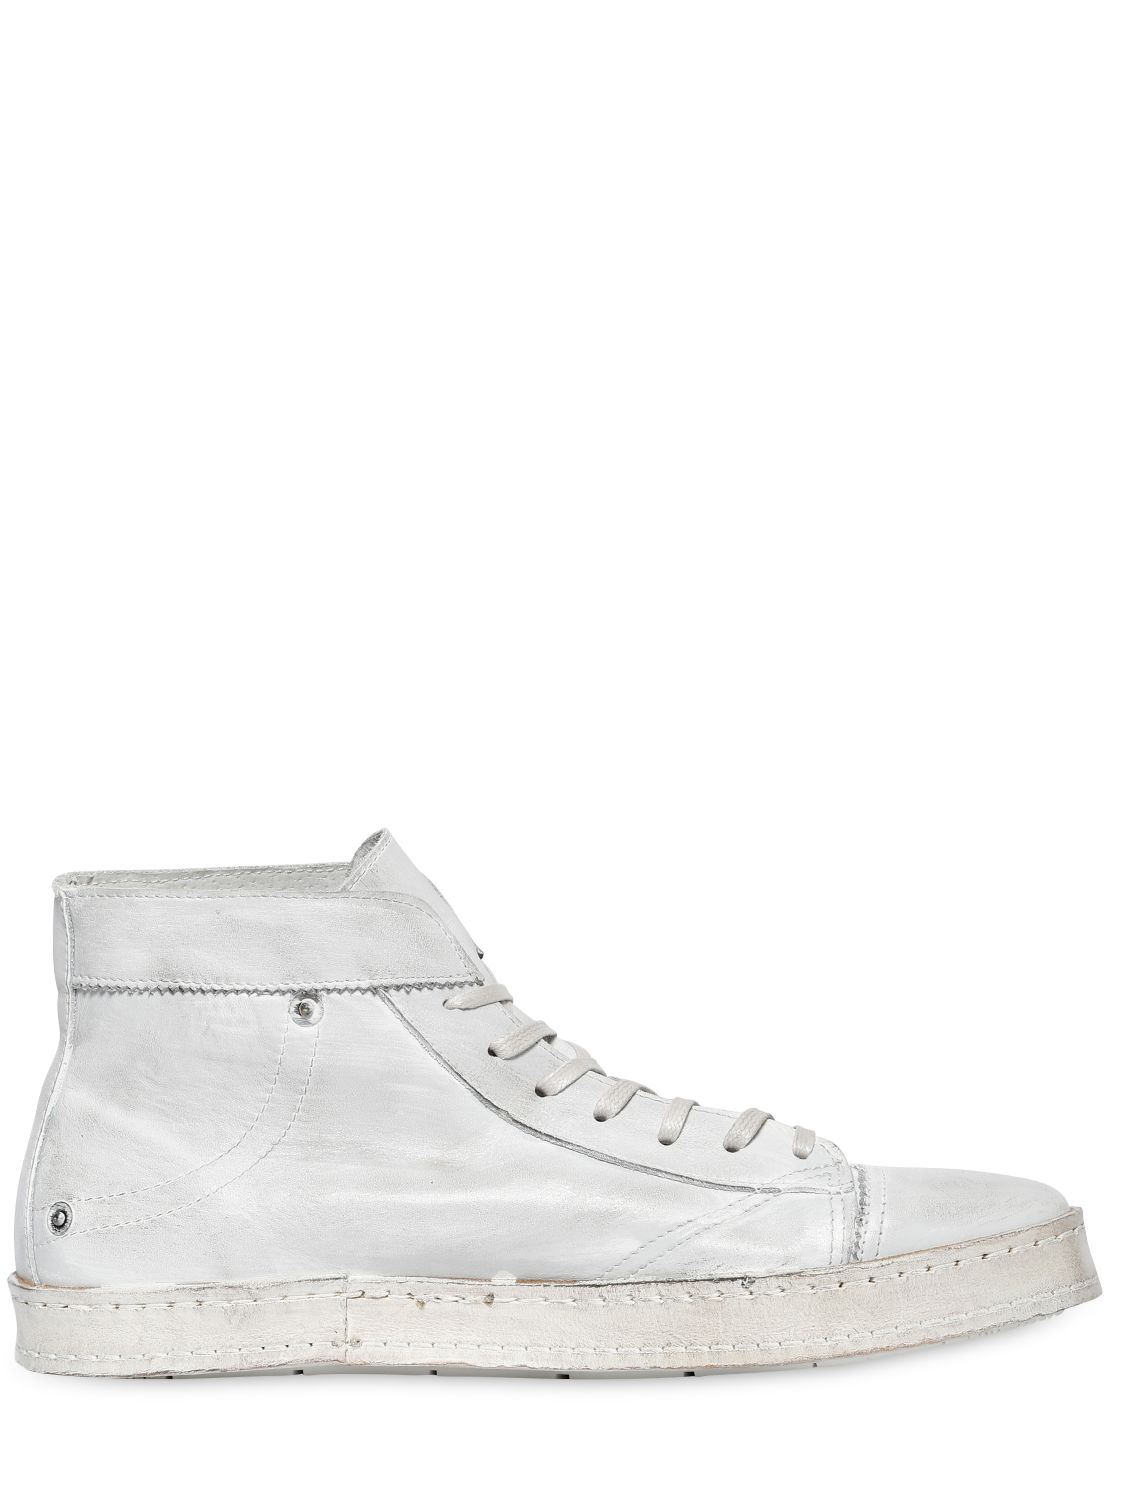 DIESEL Leather High Top Sneakers in White for Men Lyst